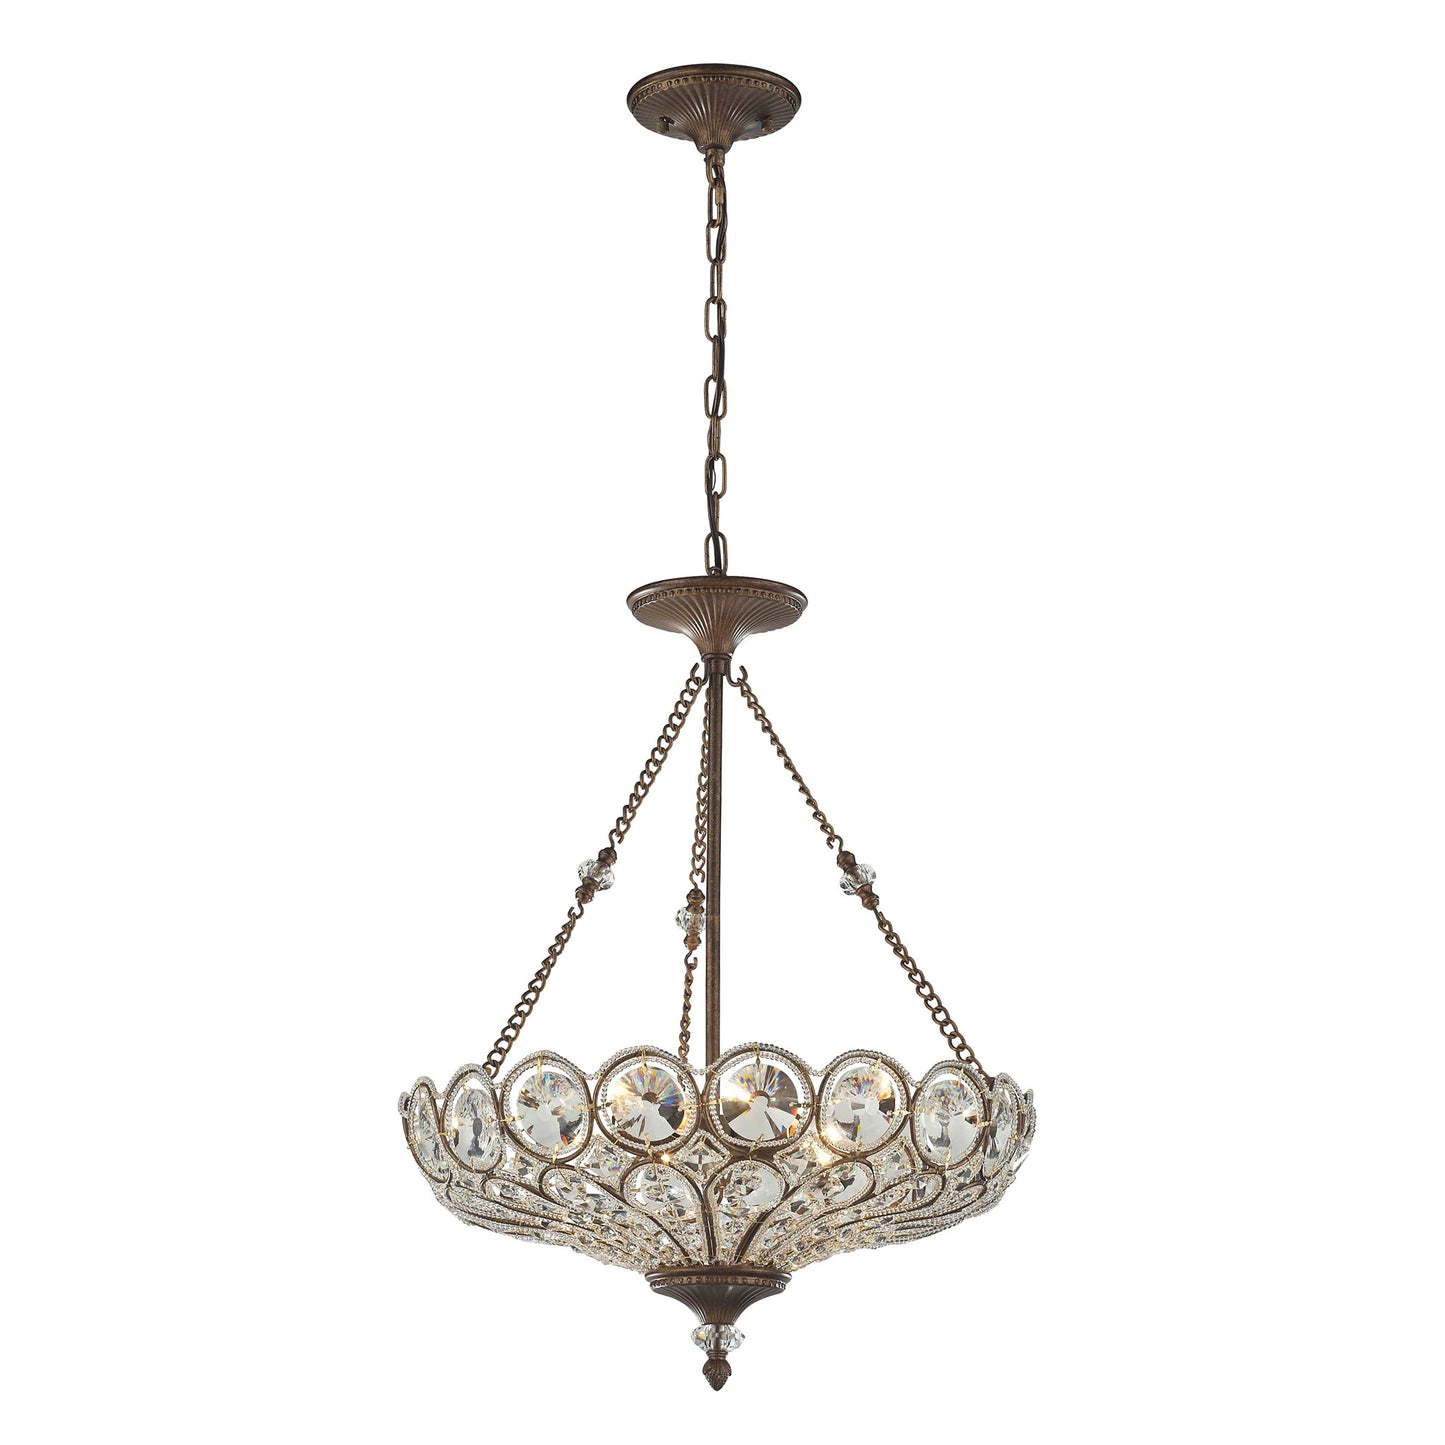 Christina 5-Light Chandelier in Mocha with Crystal